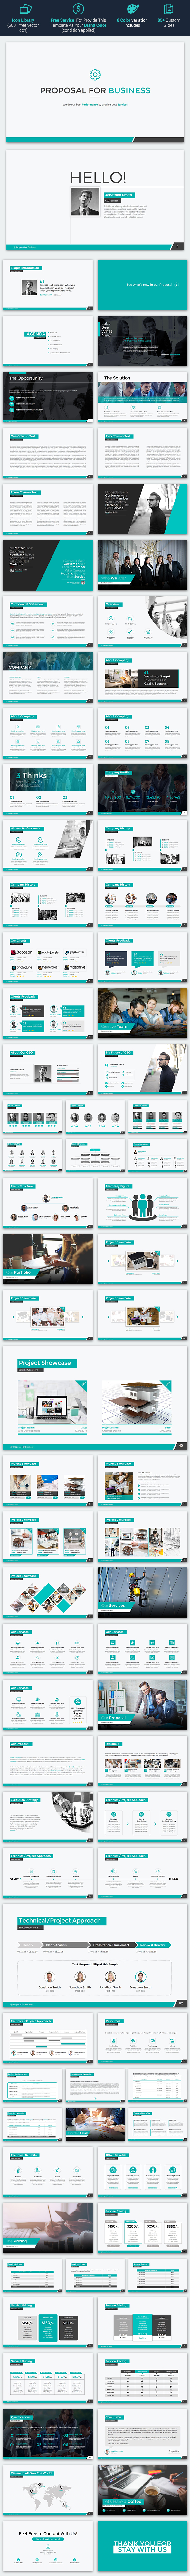 Proposal For Business / Services - Powerpoint Presentation Template